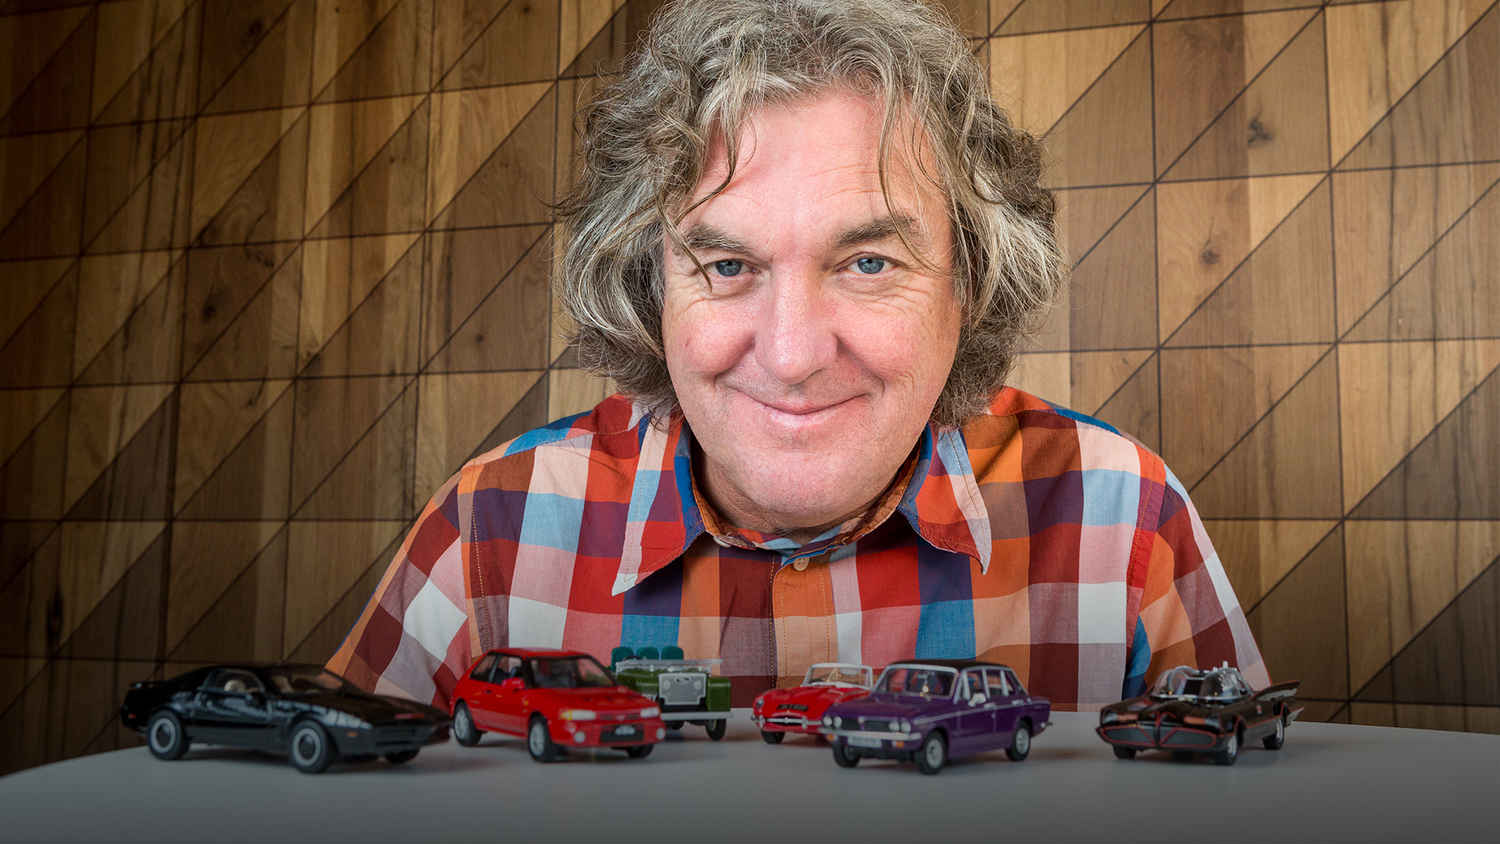 James May's Cars Of The People